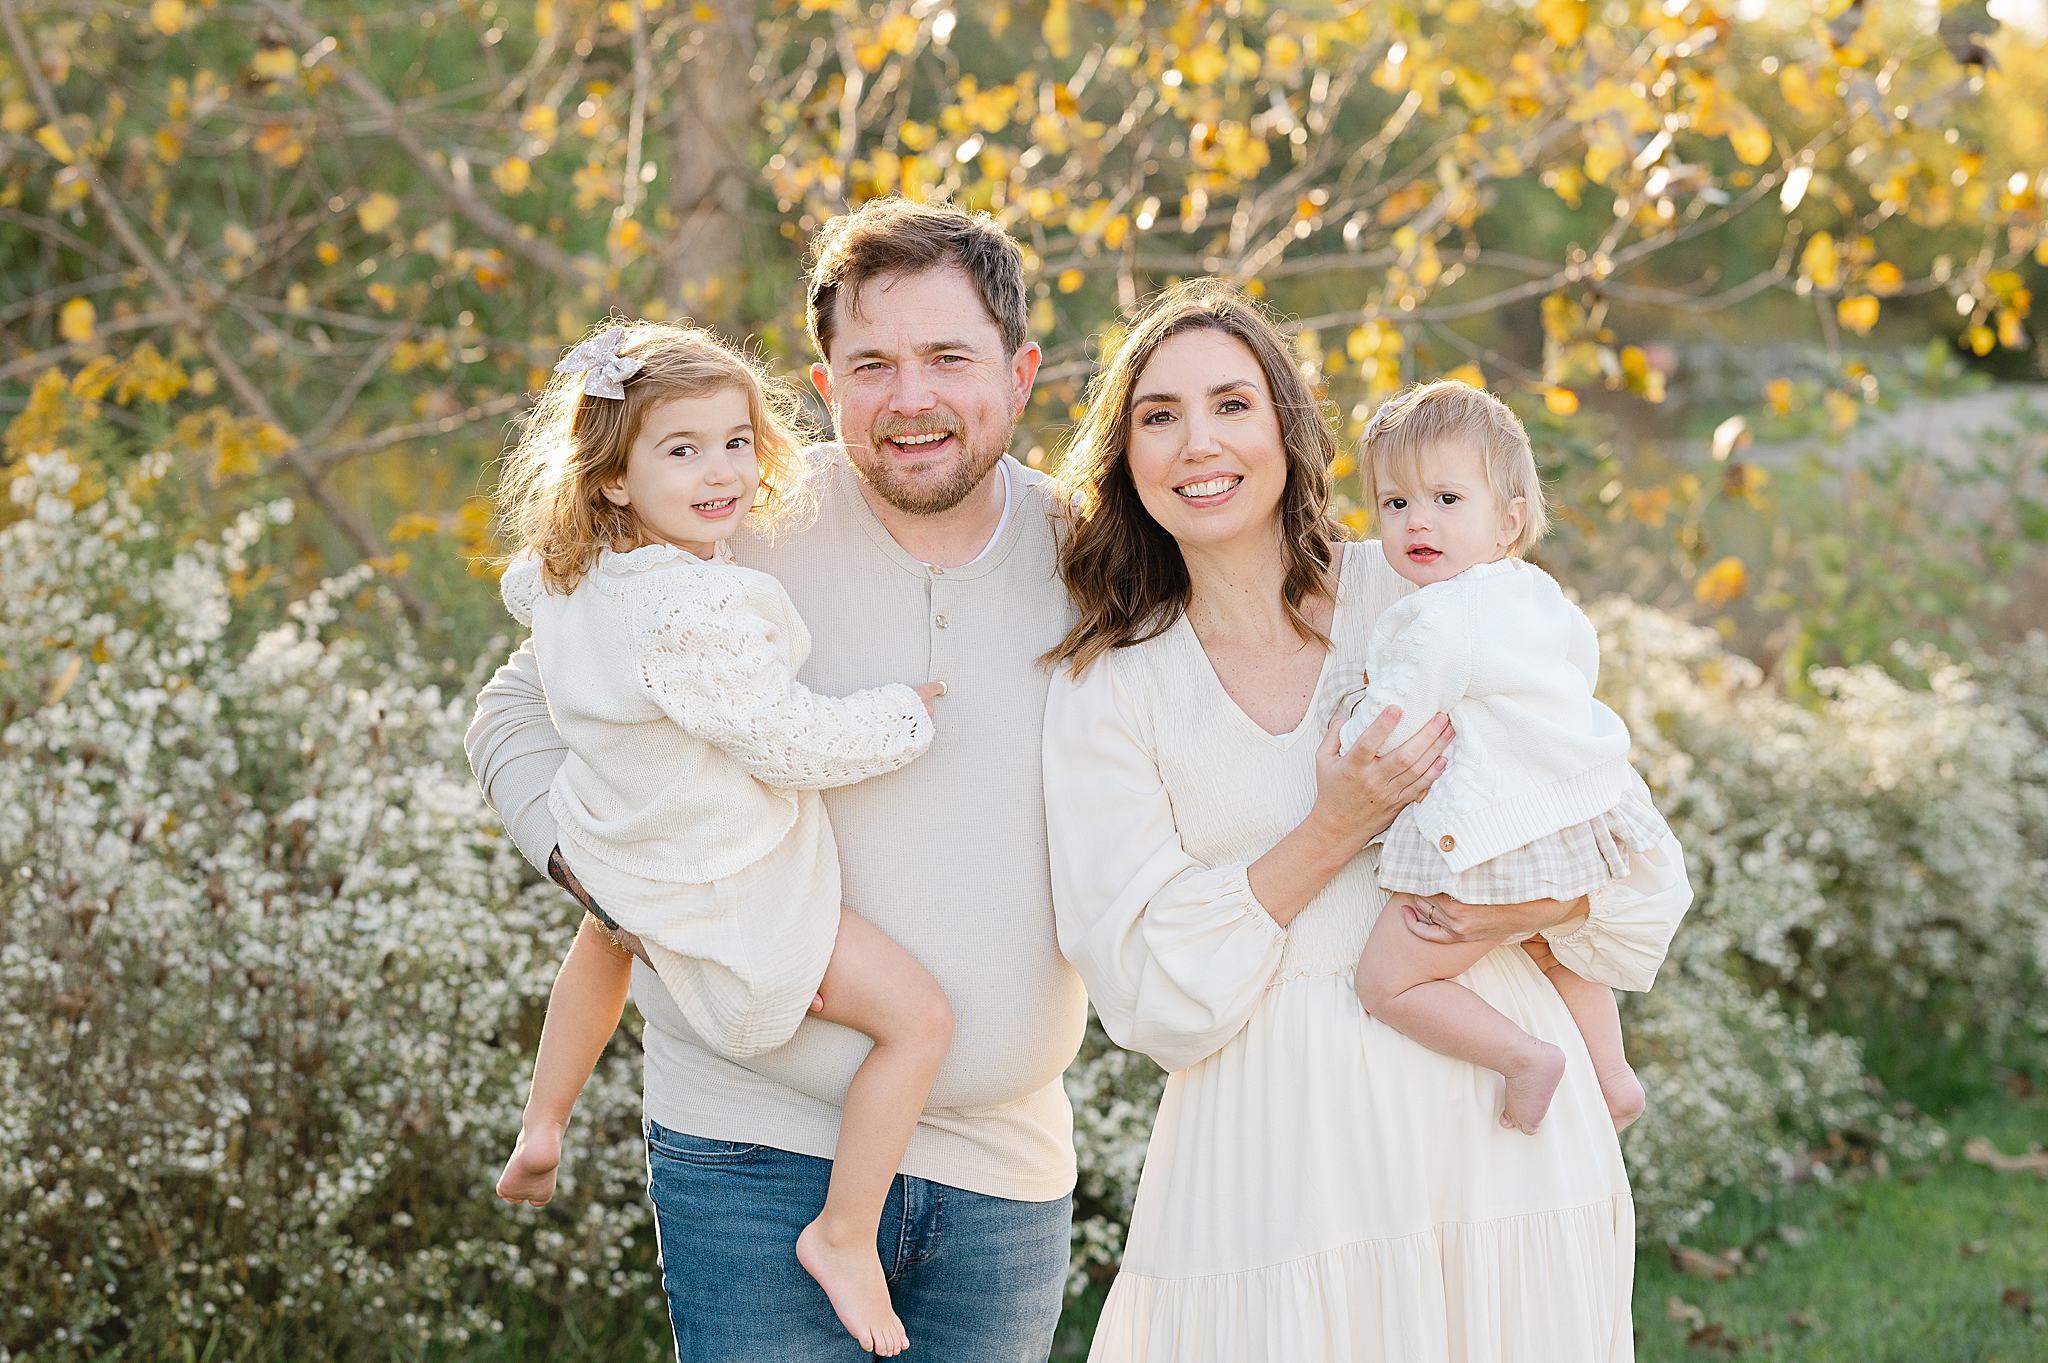 A Glimpse into a Fall Family Session | The Obert Family